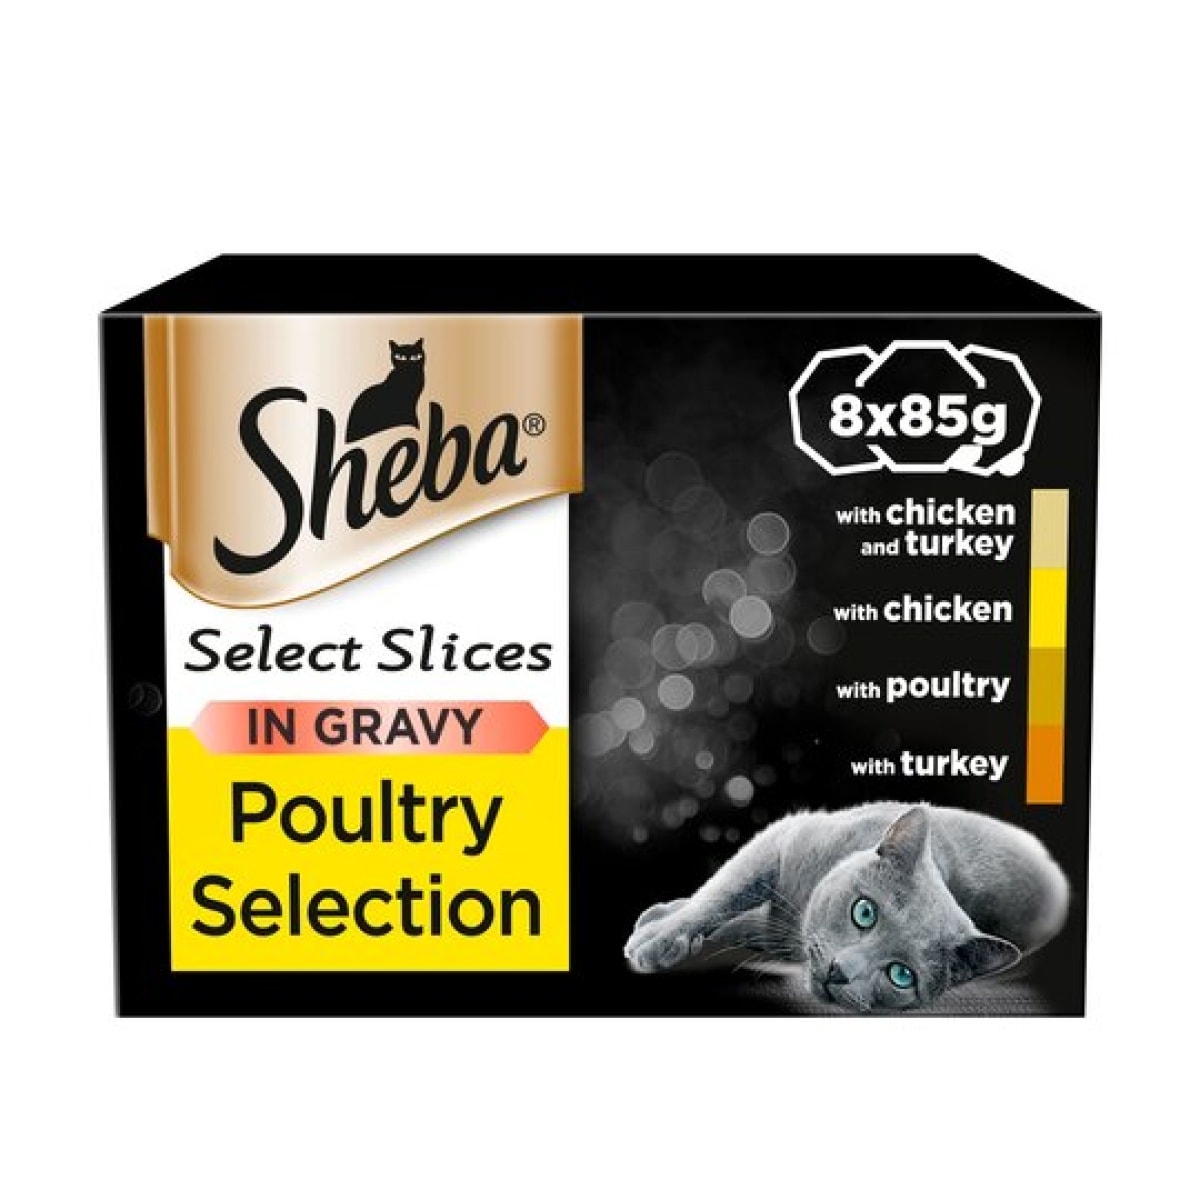 Sheba Alu Select Slices Poultry in Gravy 8 x 85g – Pawfect Supplies Ltd Product Image